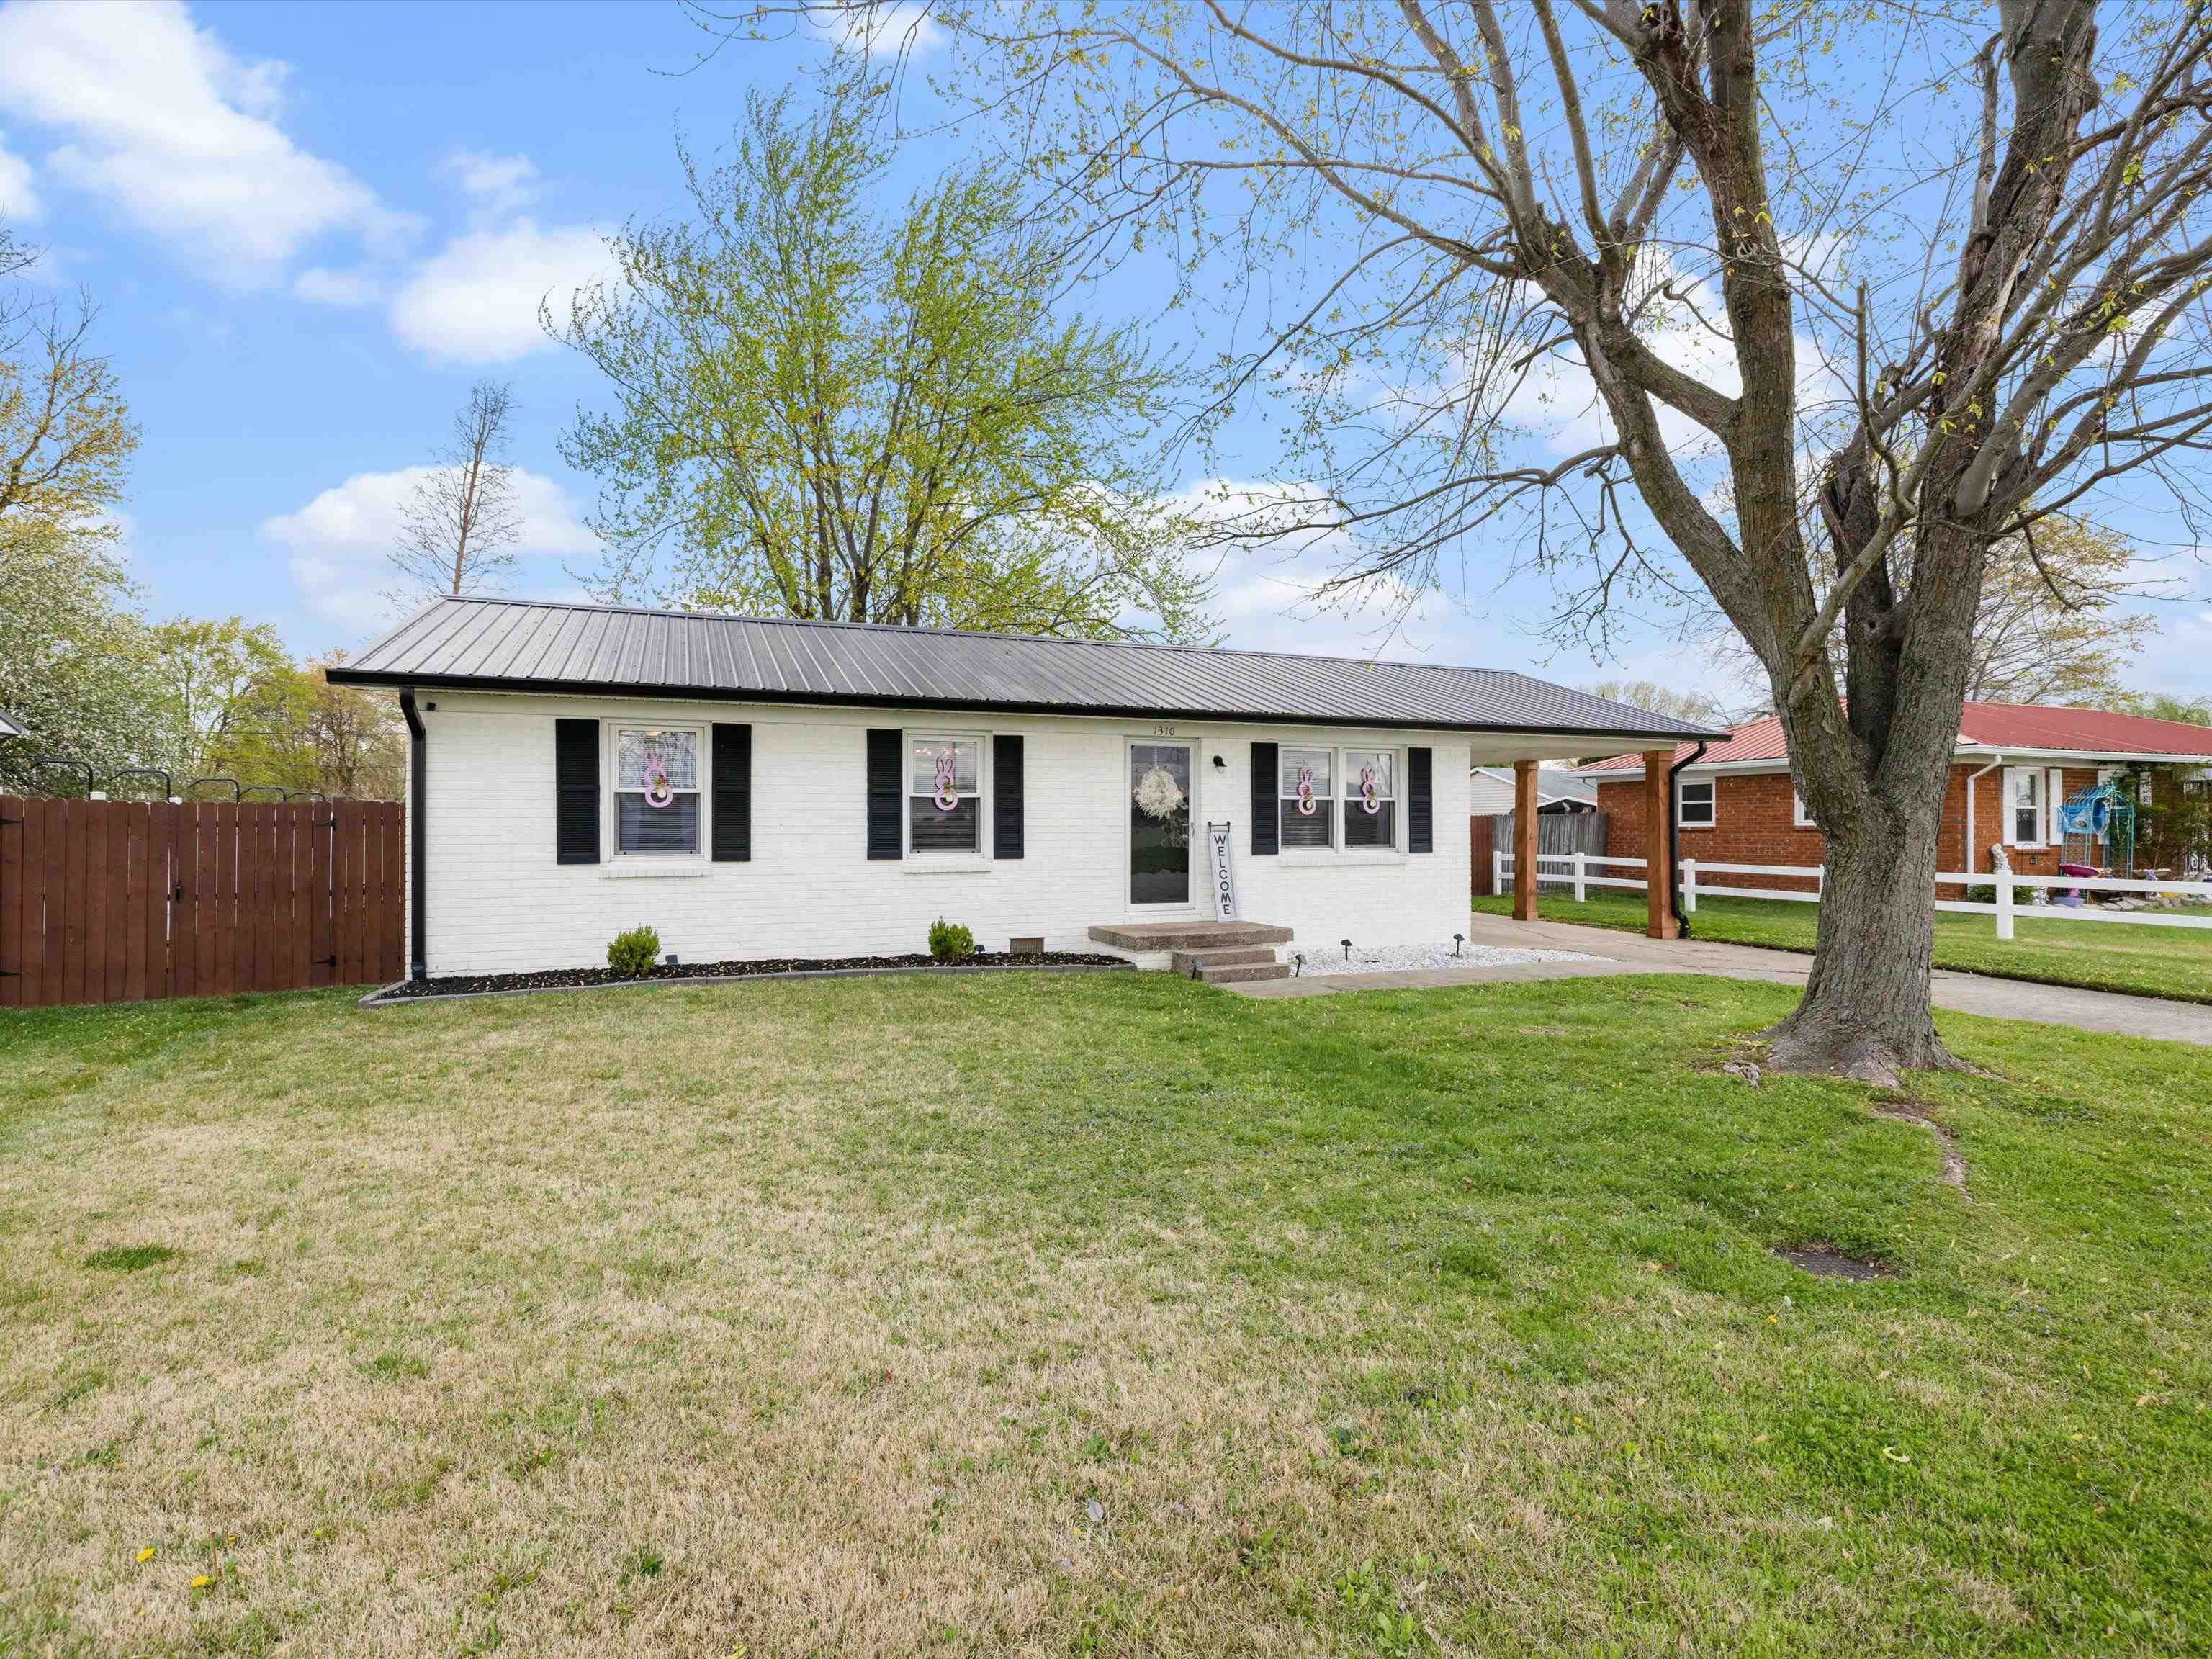 1310 Lincoln Rd., Lewisport, Kentucky 42351, 3 Bedrooms Bedrooms, ,1 BathroomBathrooms,Single Family Residence,For Sale,Lincoln Rd.,89320